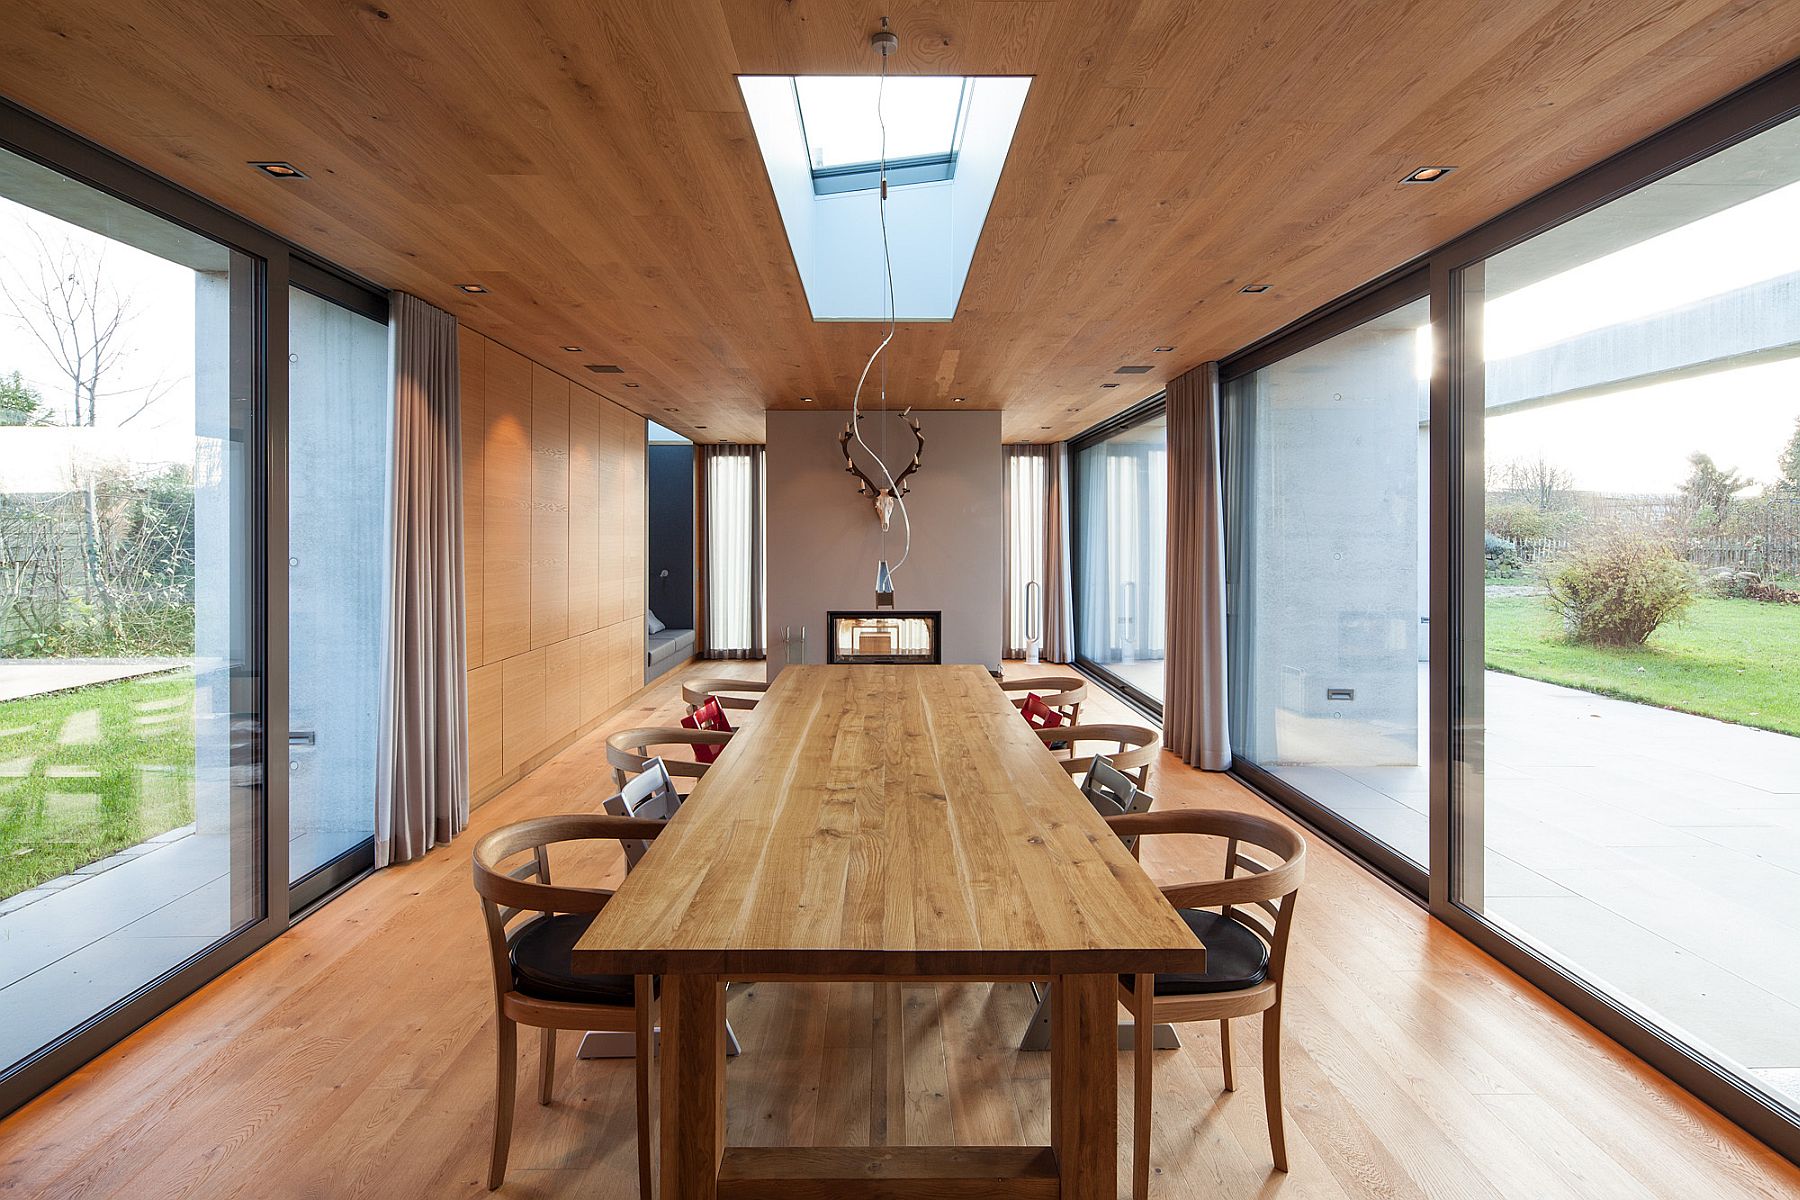 Sliding glass doors turn indoor dining room into a breey, outdoorsy space when needed